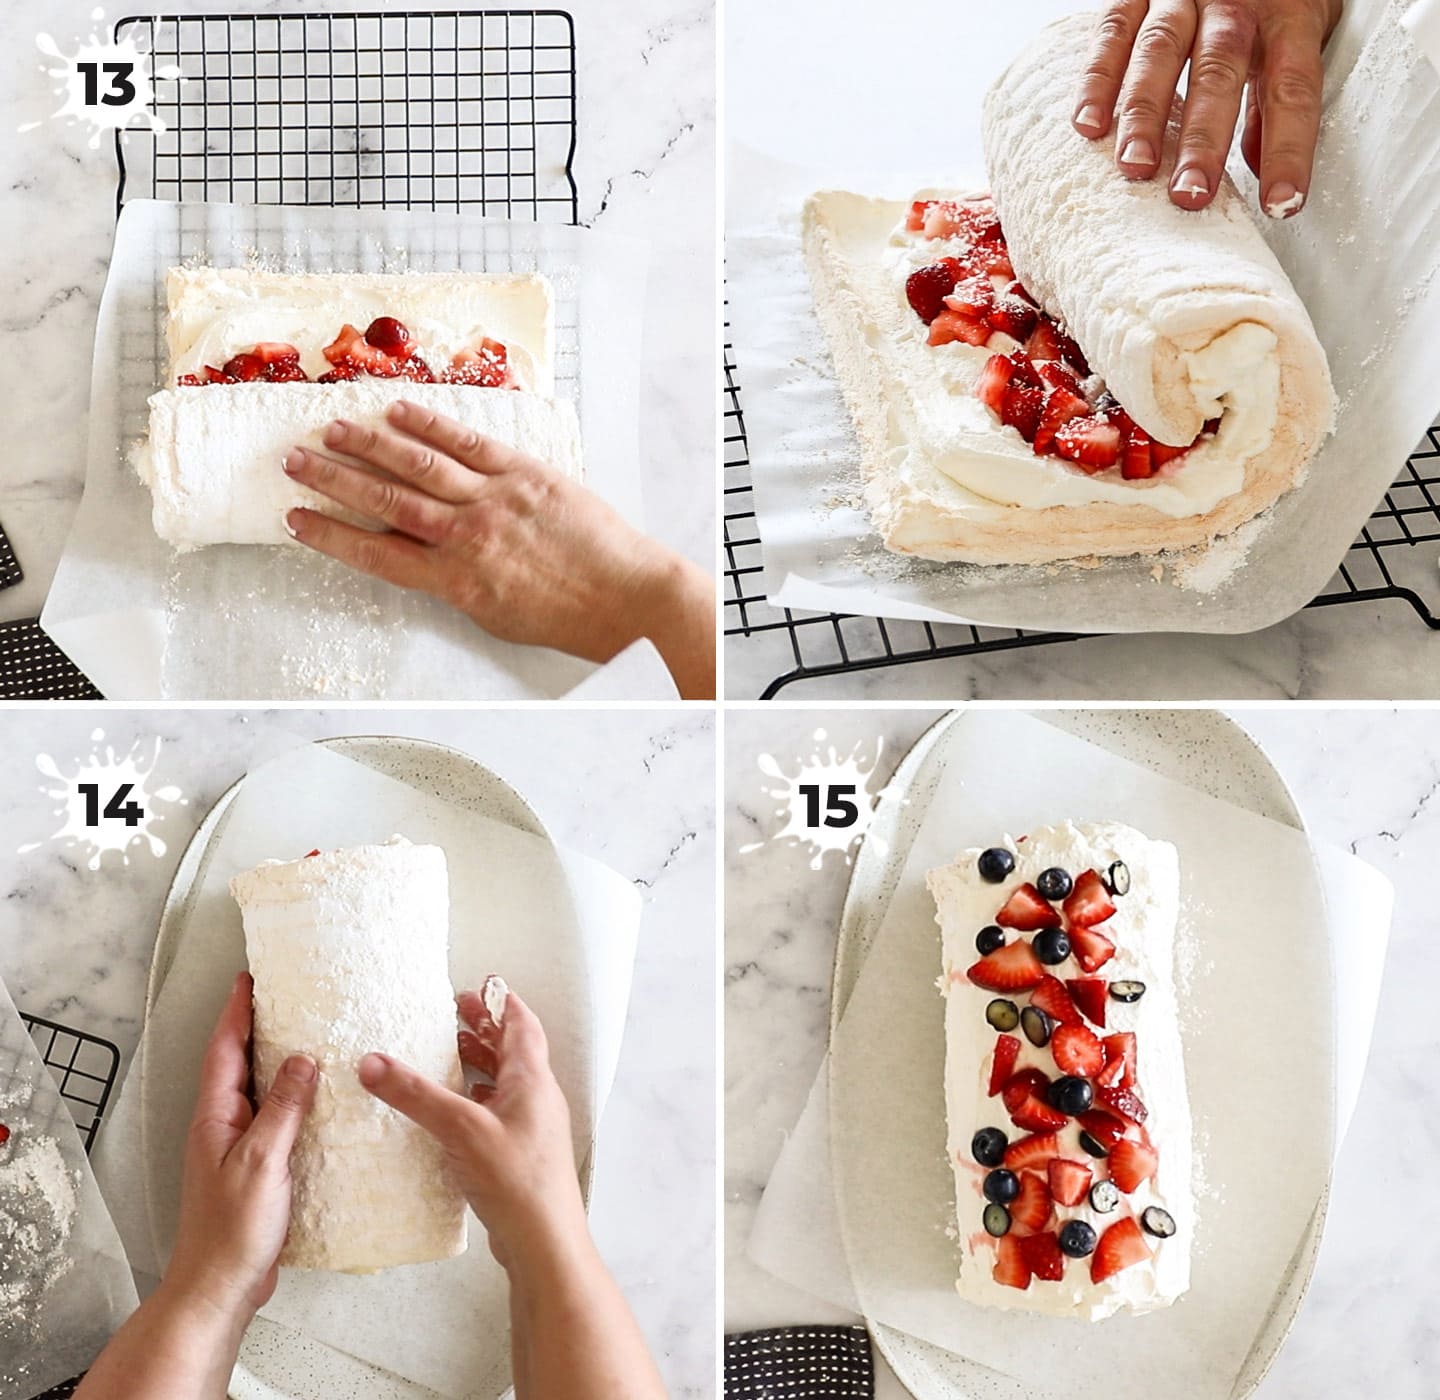 Showing how to roll and finish the pavlova roll.